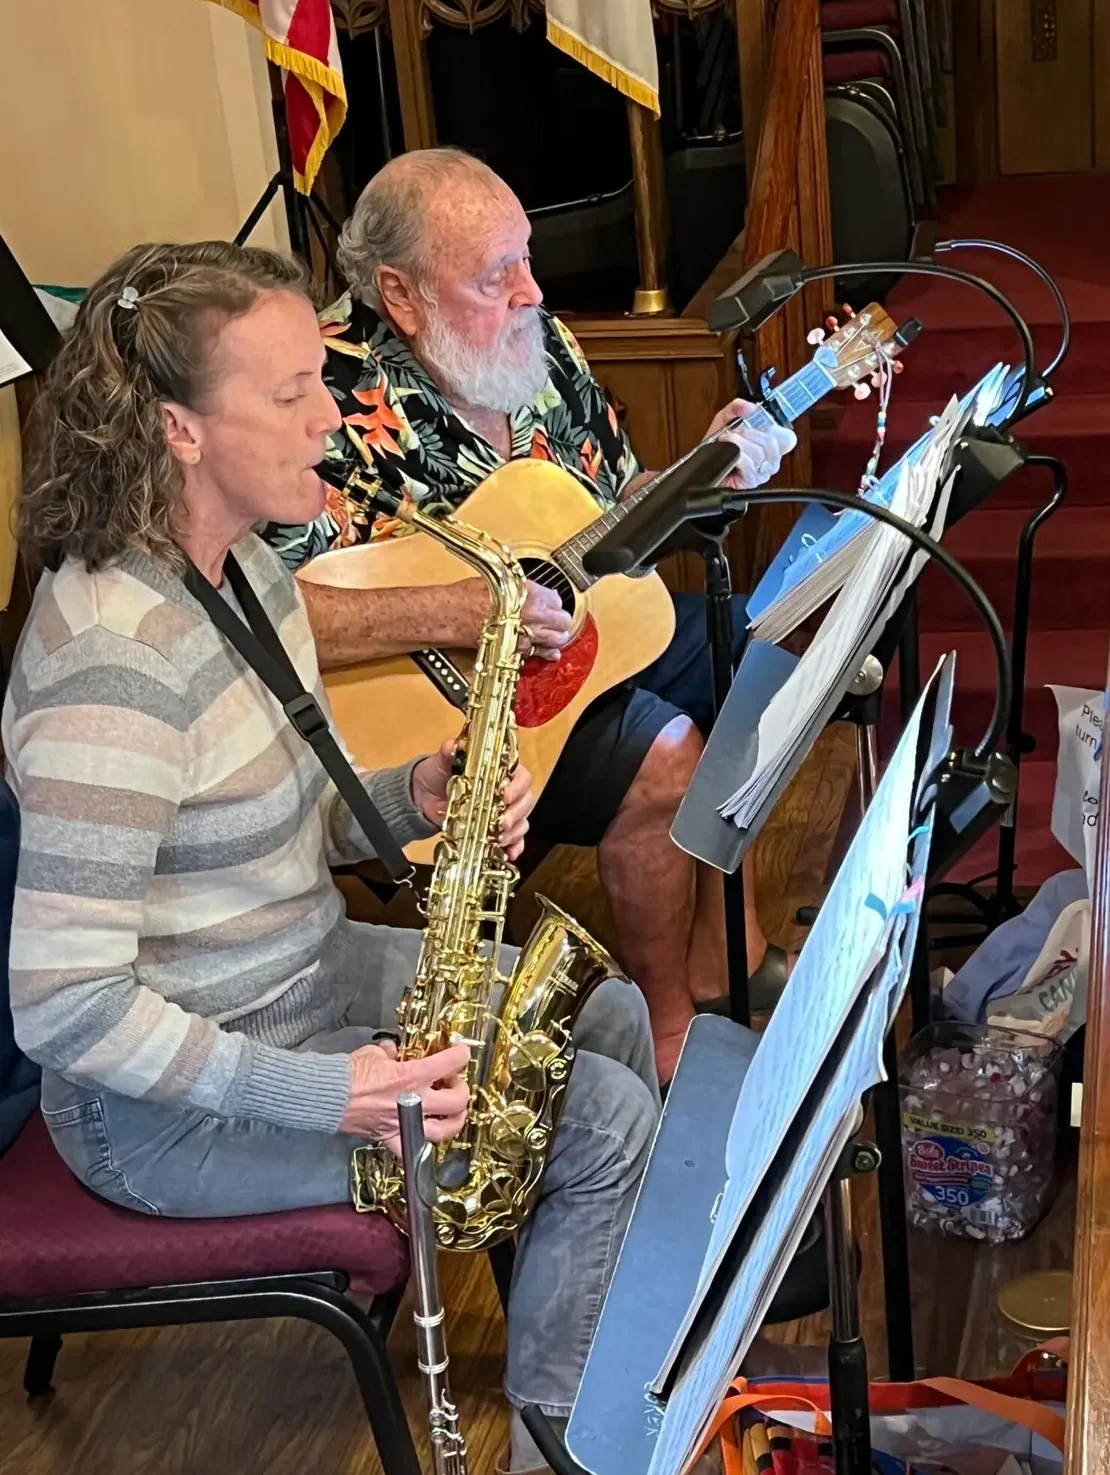 saxaphone and guitar player in worship